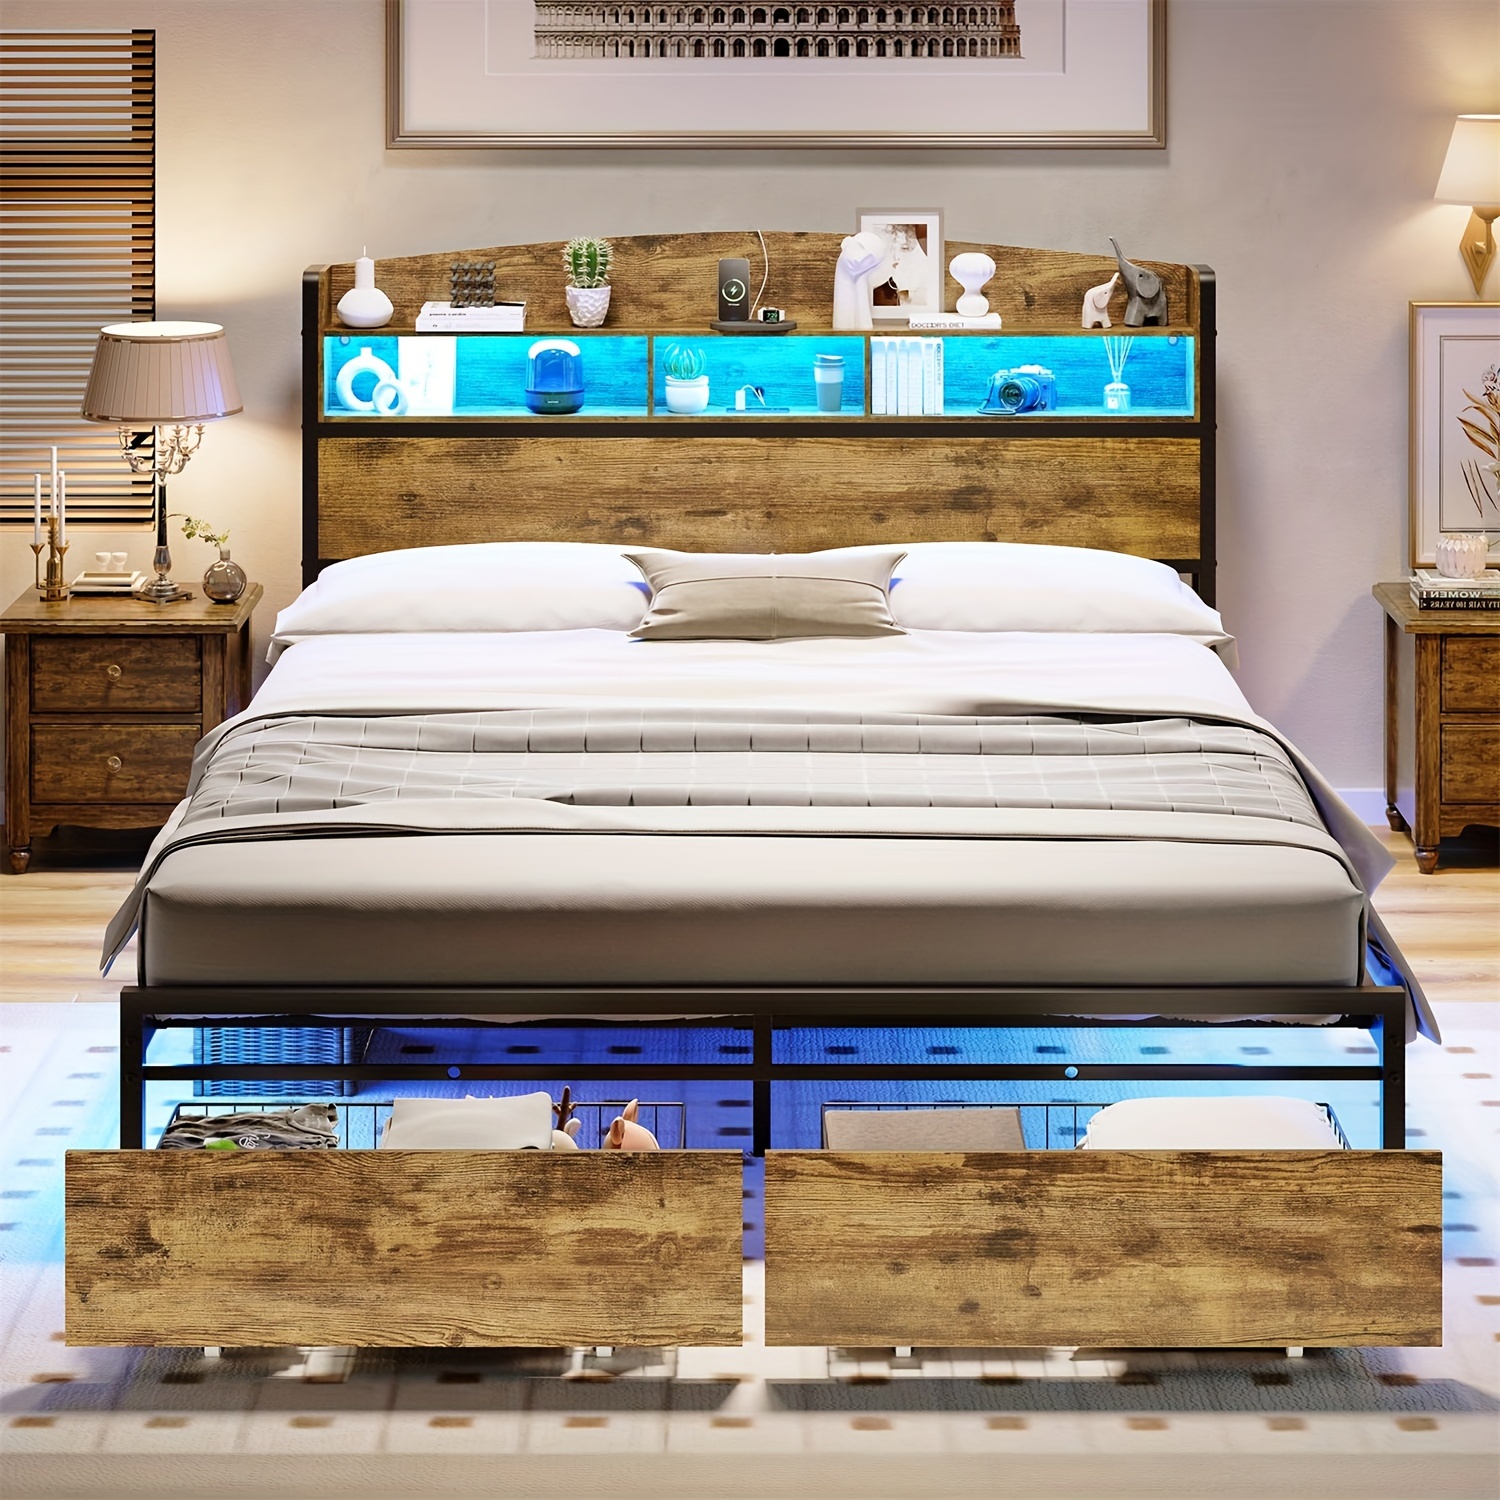 

Metal Bed Frame With Led Lights & Power Strips, Queen Platform Bed With Storage Shelves & Drawers For Bedroom, Rustic Brown